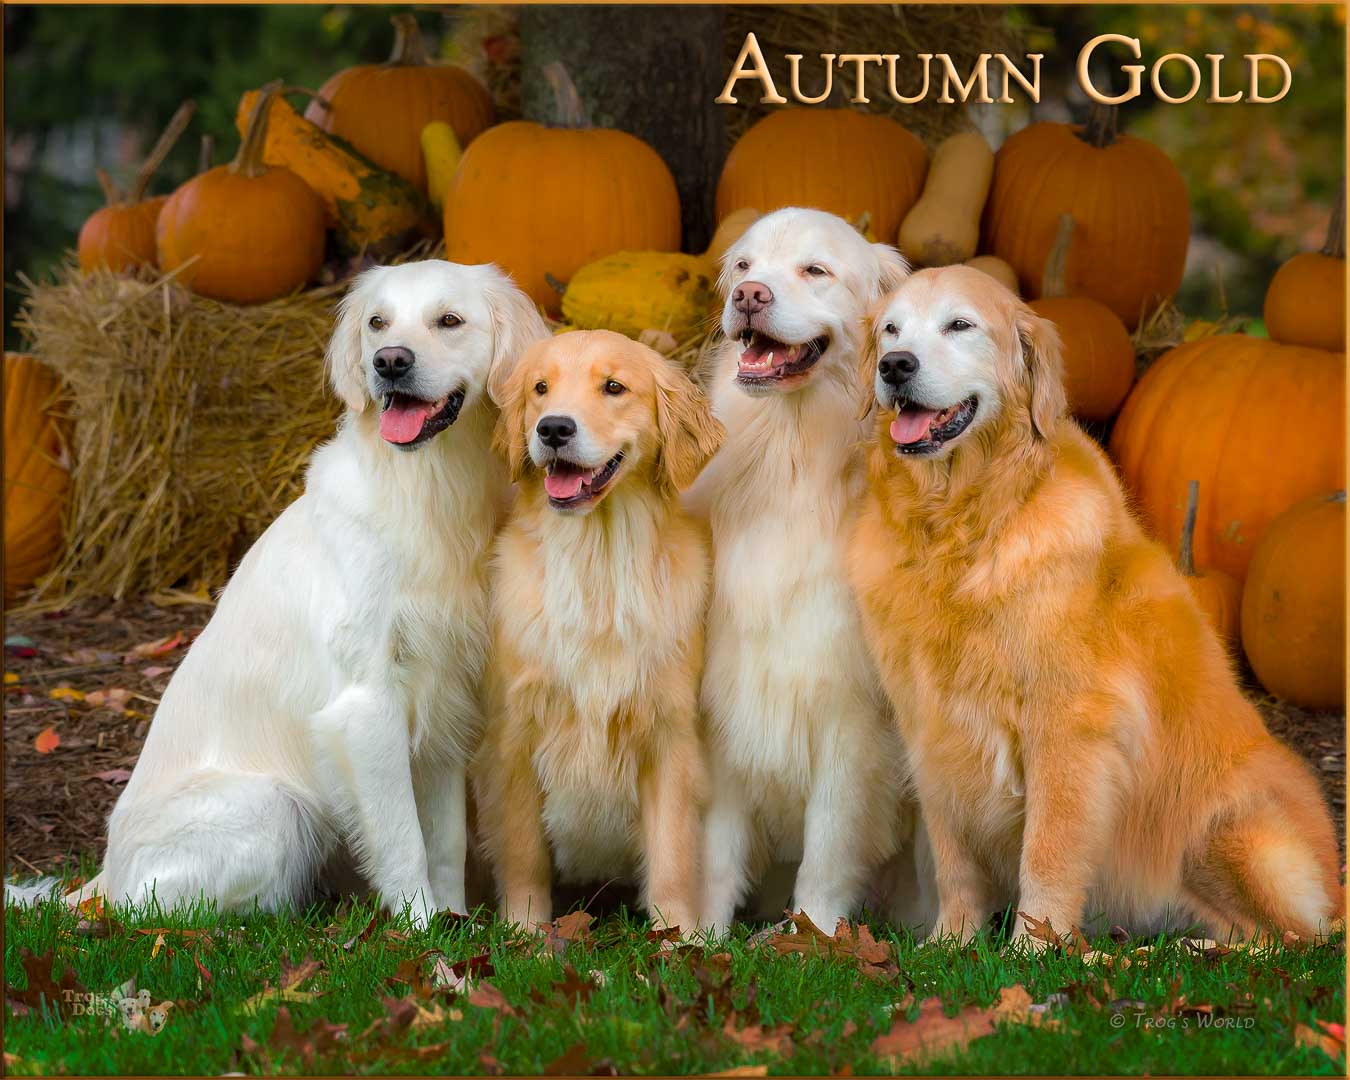 Four Golden Retrievers pose in front of the pumpkins